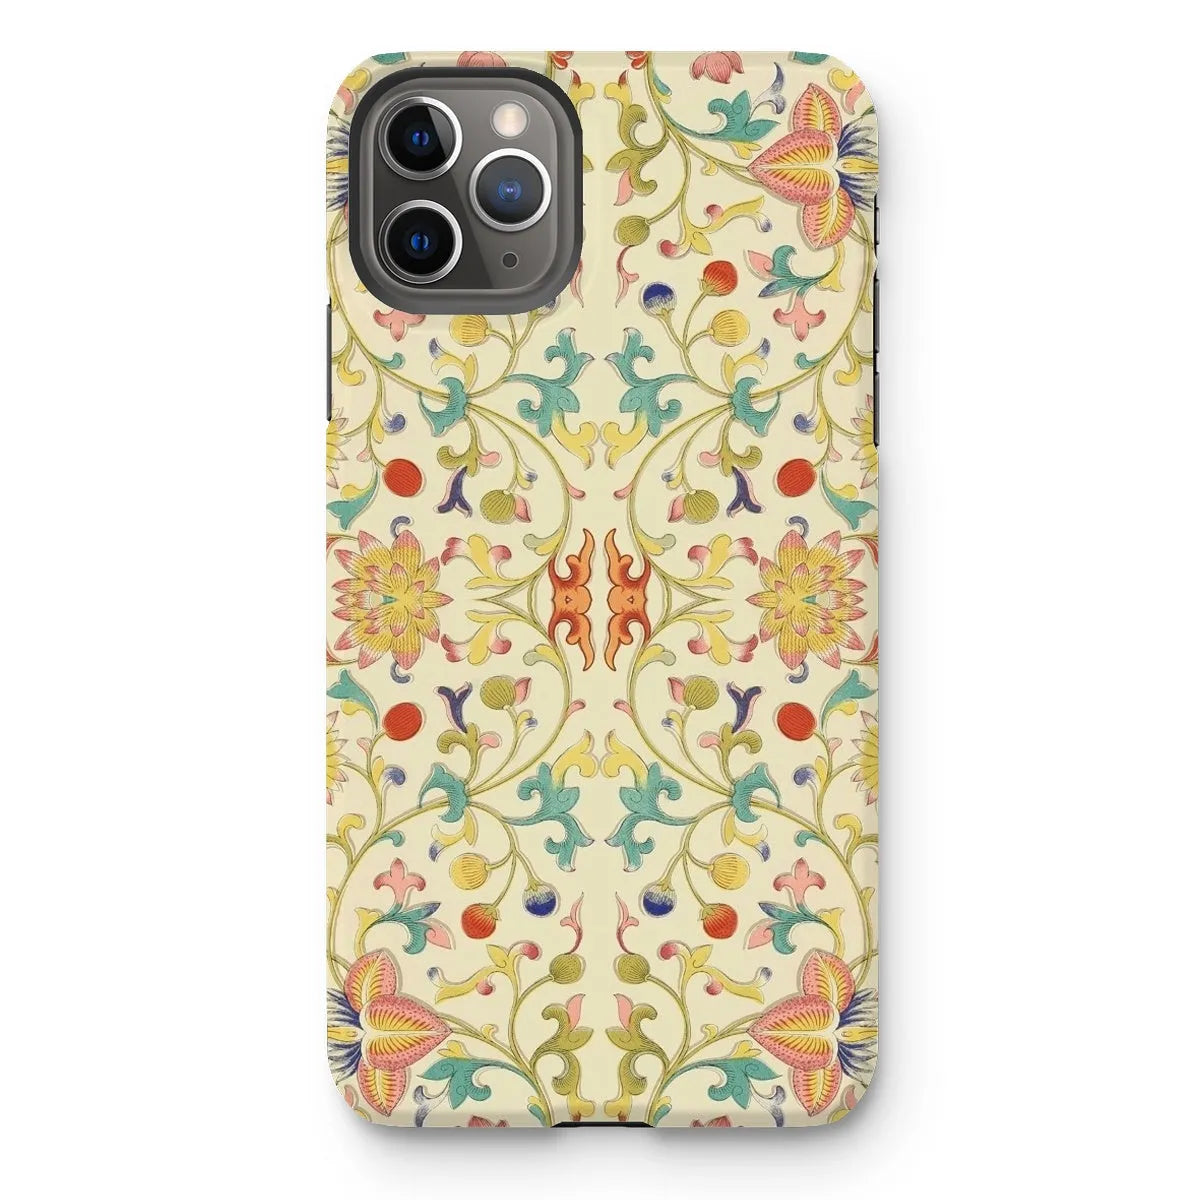 Over The Rainbow - Chinoiserie Pattern Art Phone Case - Iphone 11 Pro Max / Matte - Mobile Phone Cases - Aesthetic Art